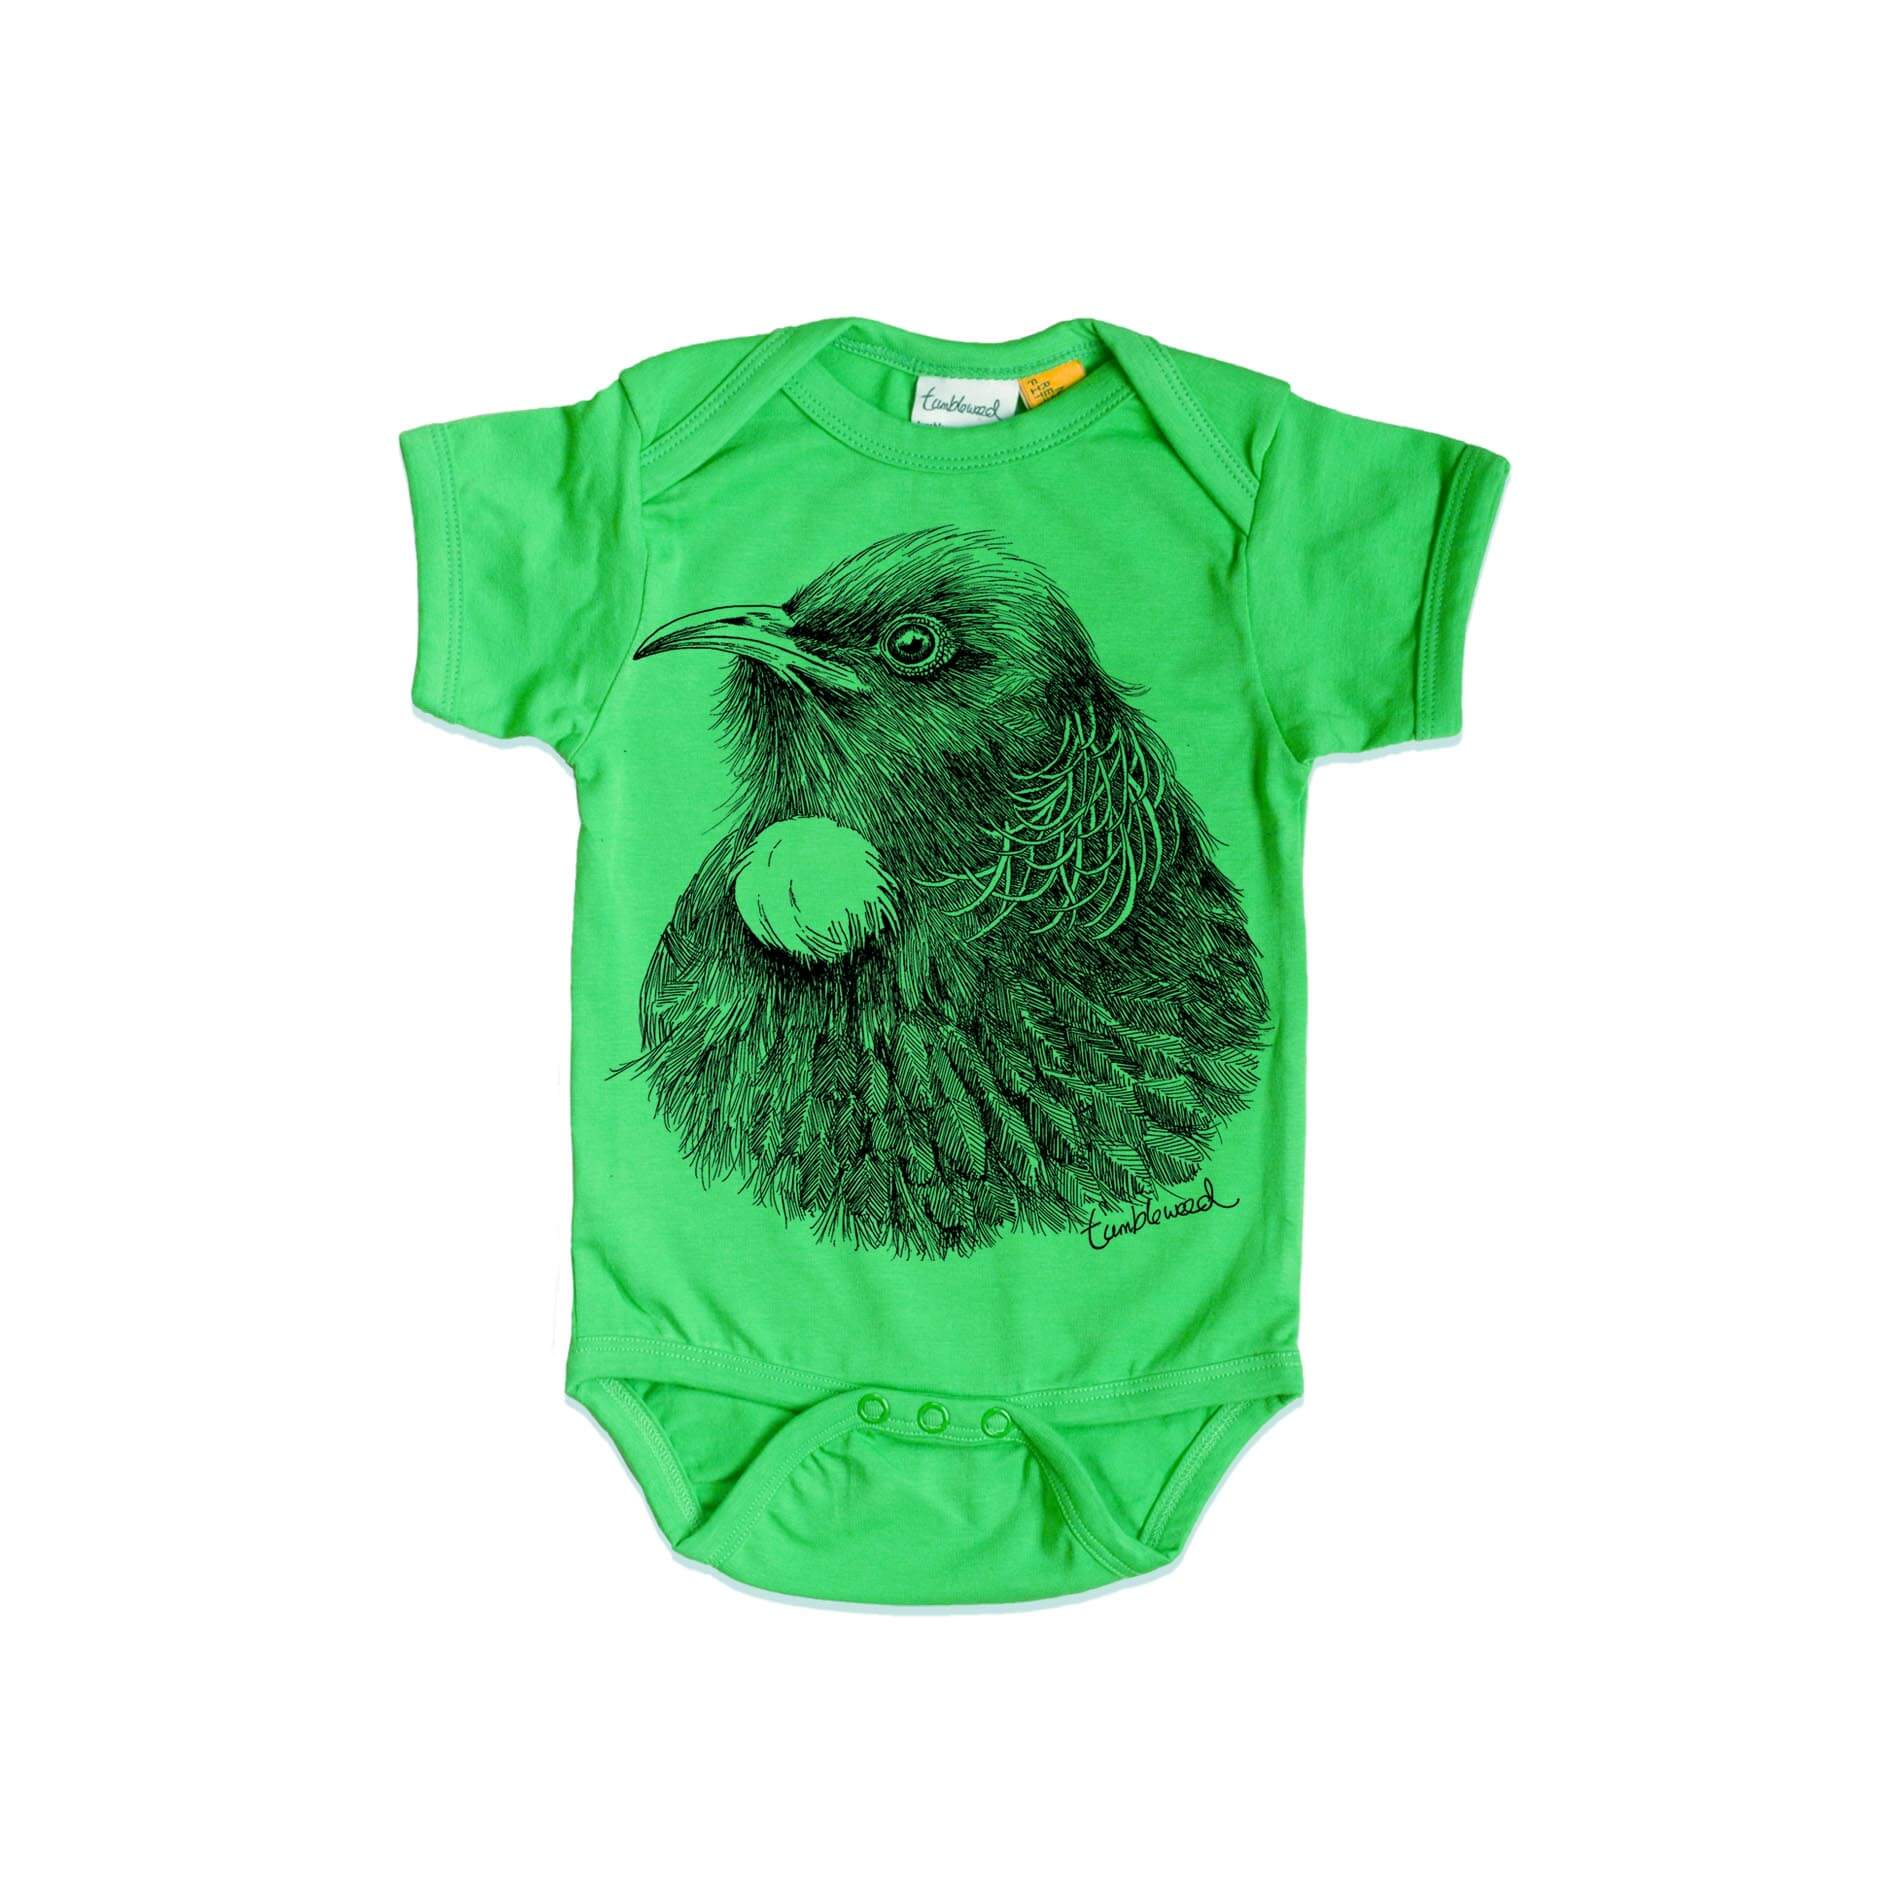 Short sleeved, green, organic cotton, baby onesie featuring a screen printed Tui design.
 design.